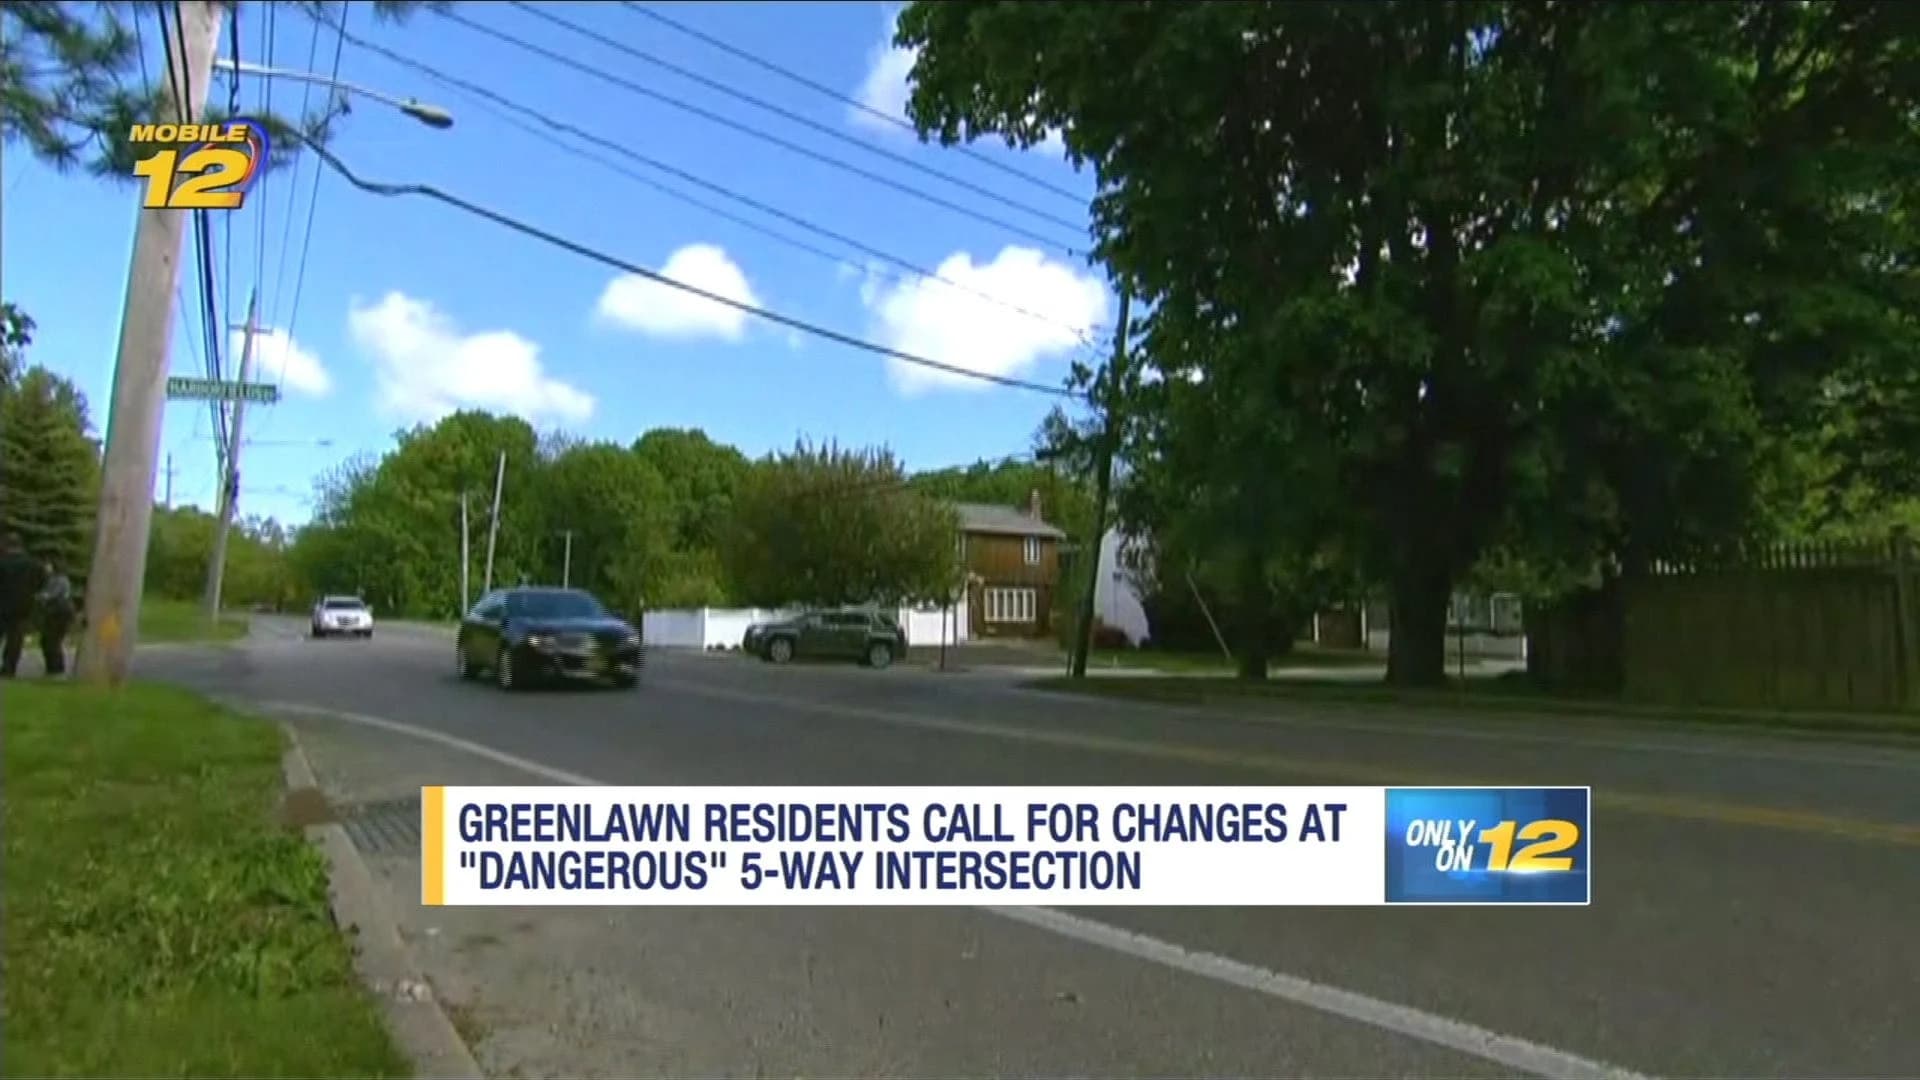 Residents call for changes at Greenlawn 5-way intersection